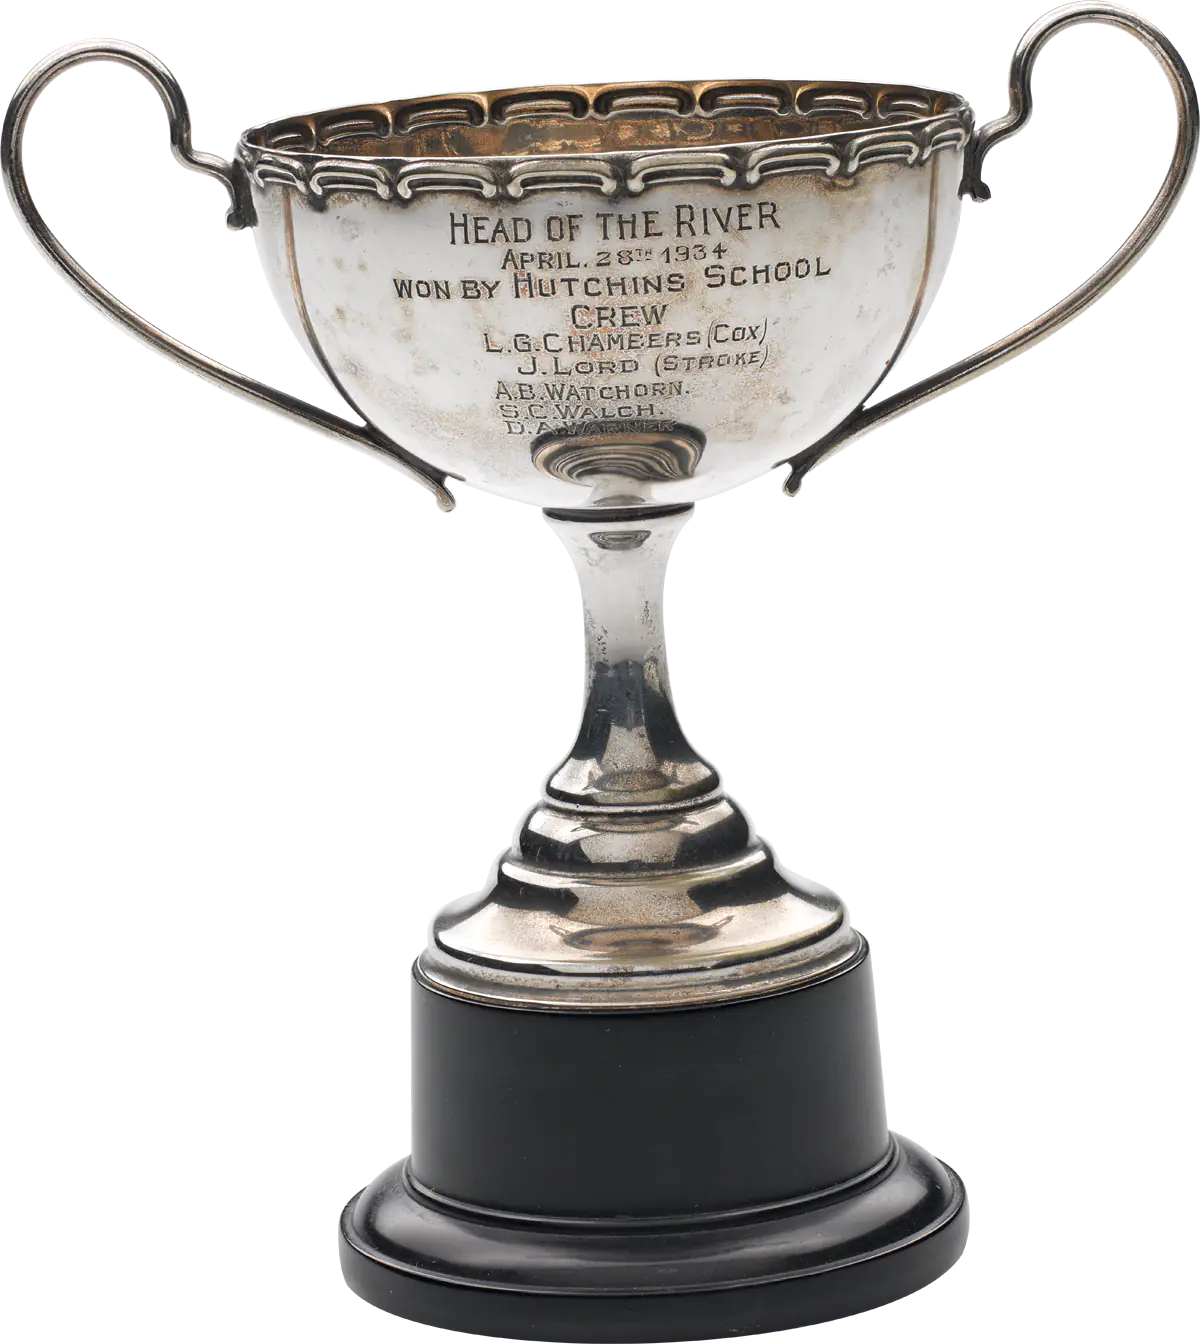 Head of the River cup, 1934.